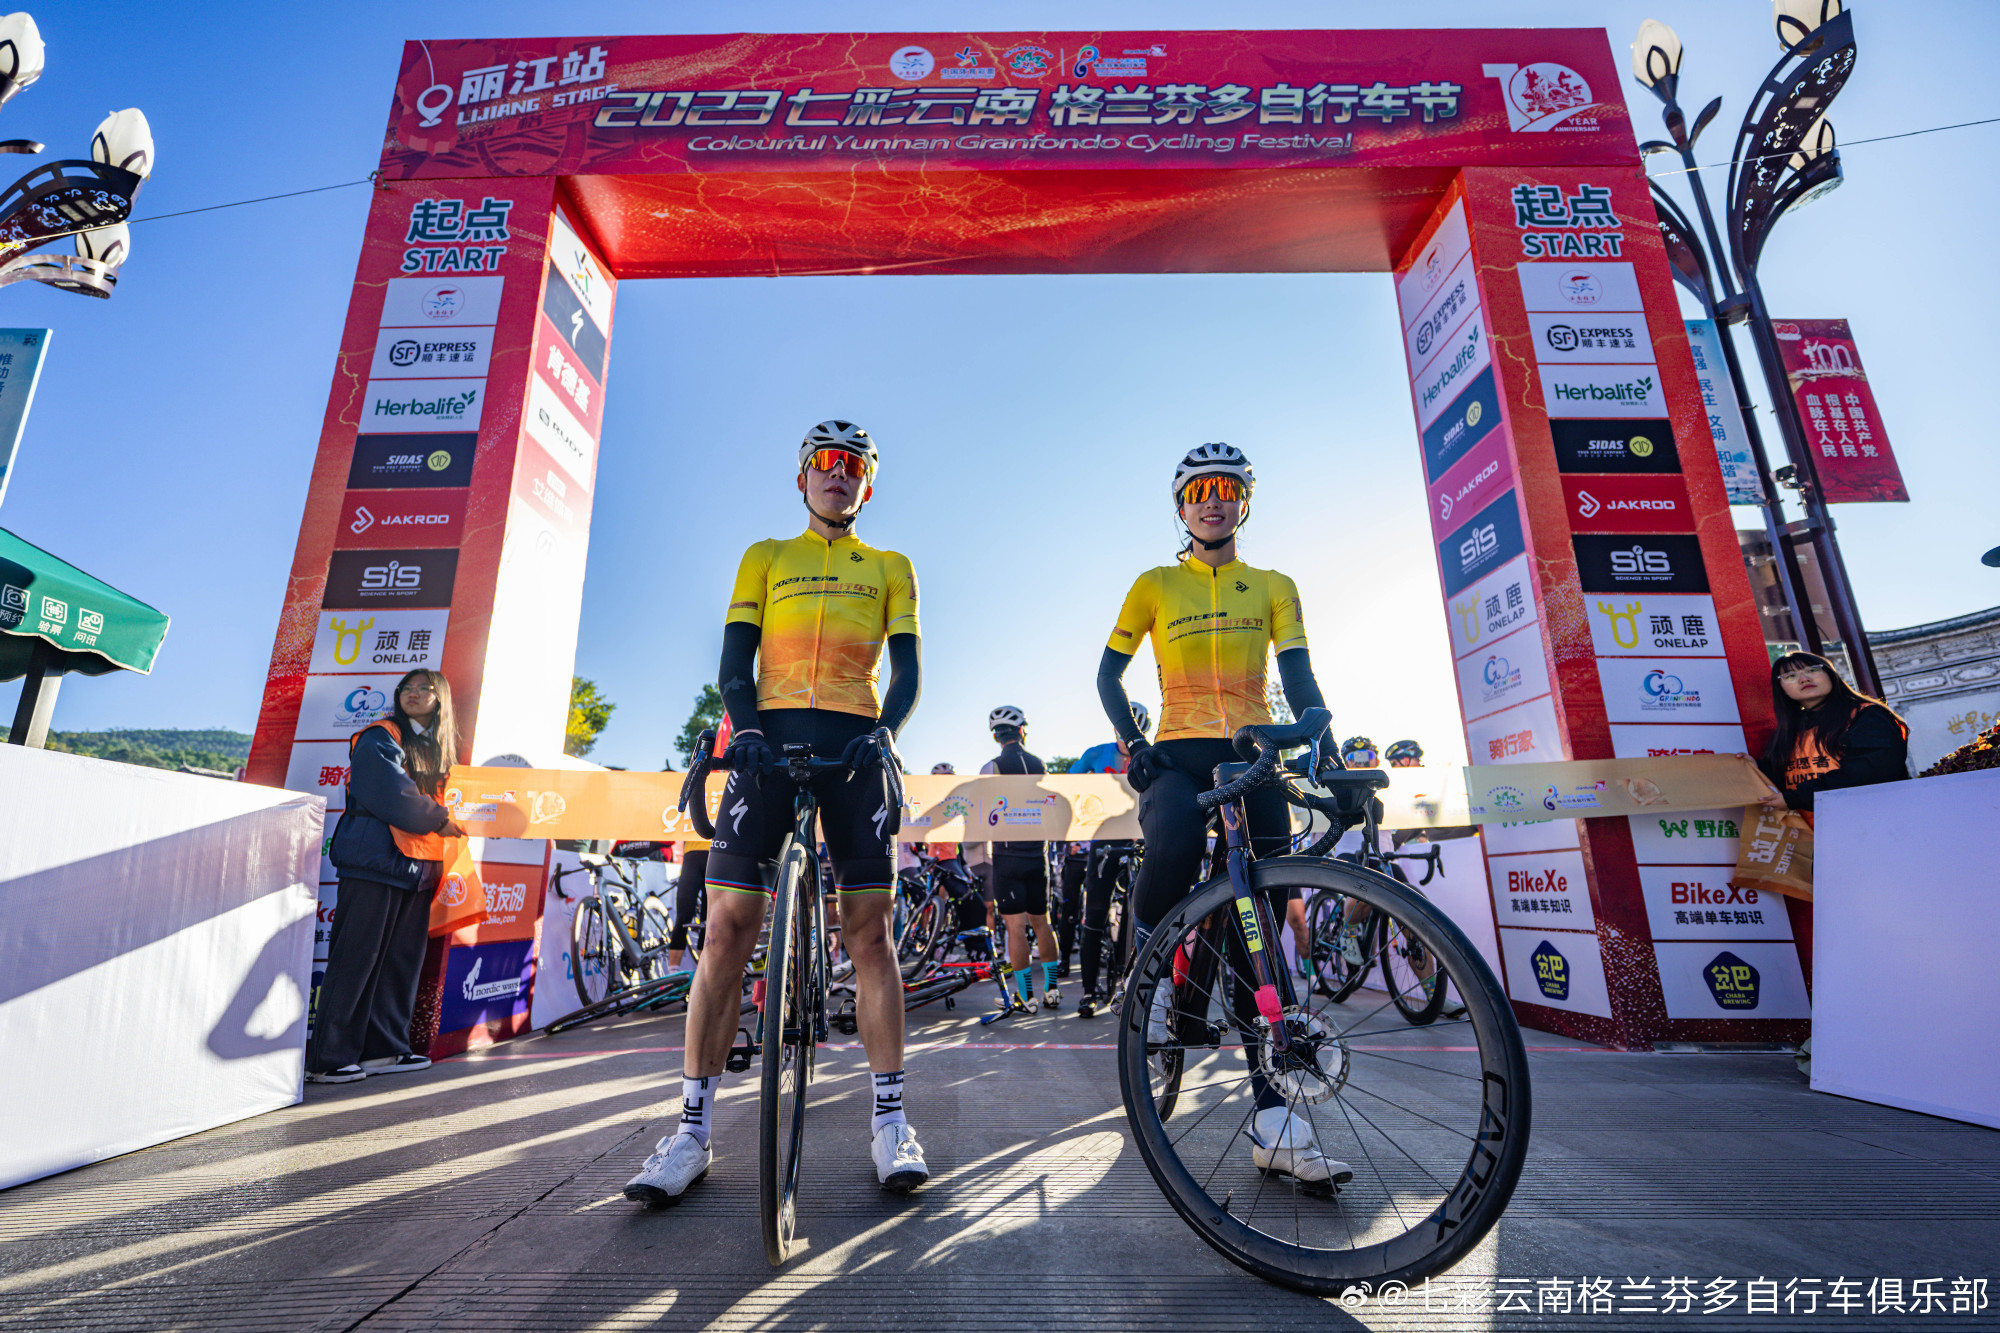 Li Pengcheng (L) and Li Si celebrate their race wins at the finish line of the Colorful Yunnan Granfondo Cycling Festival in Lijiang, China, November 10, 2023. /Colorful Yunnan Granfondo Cycling Club's official Weibo